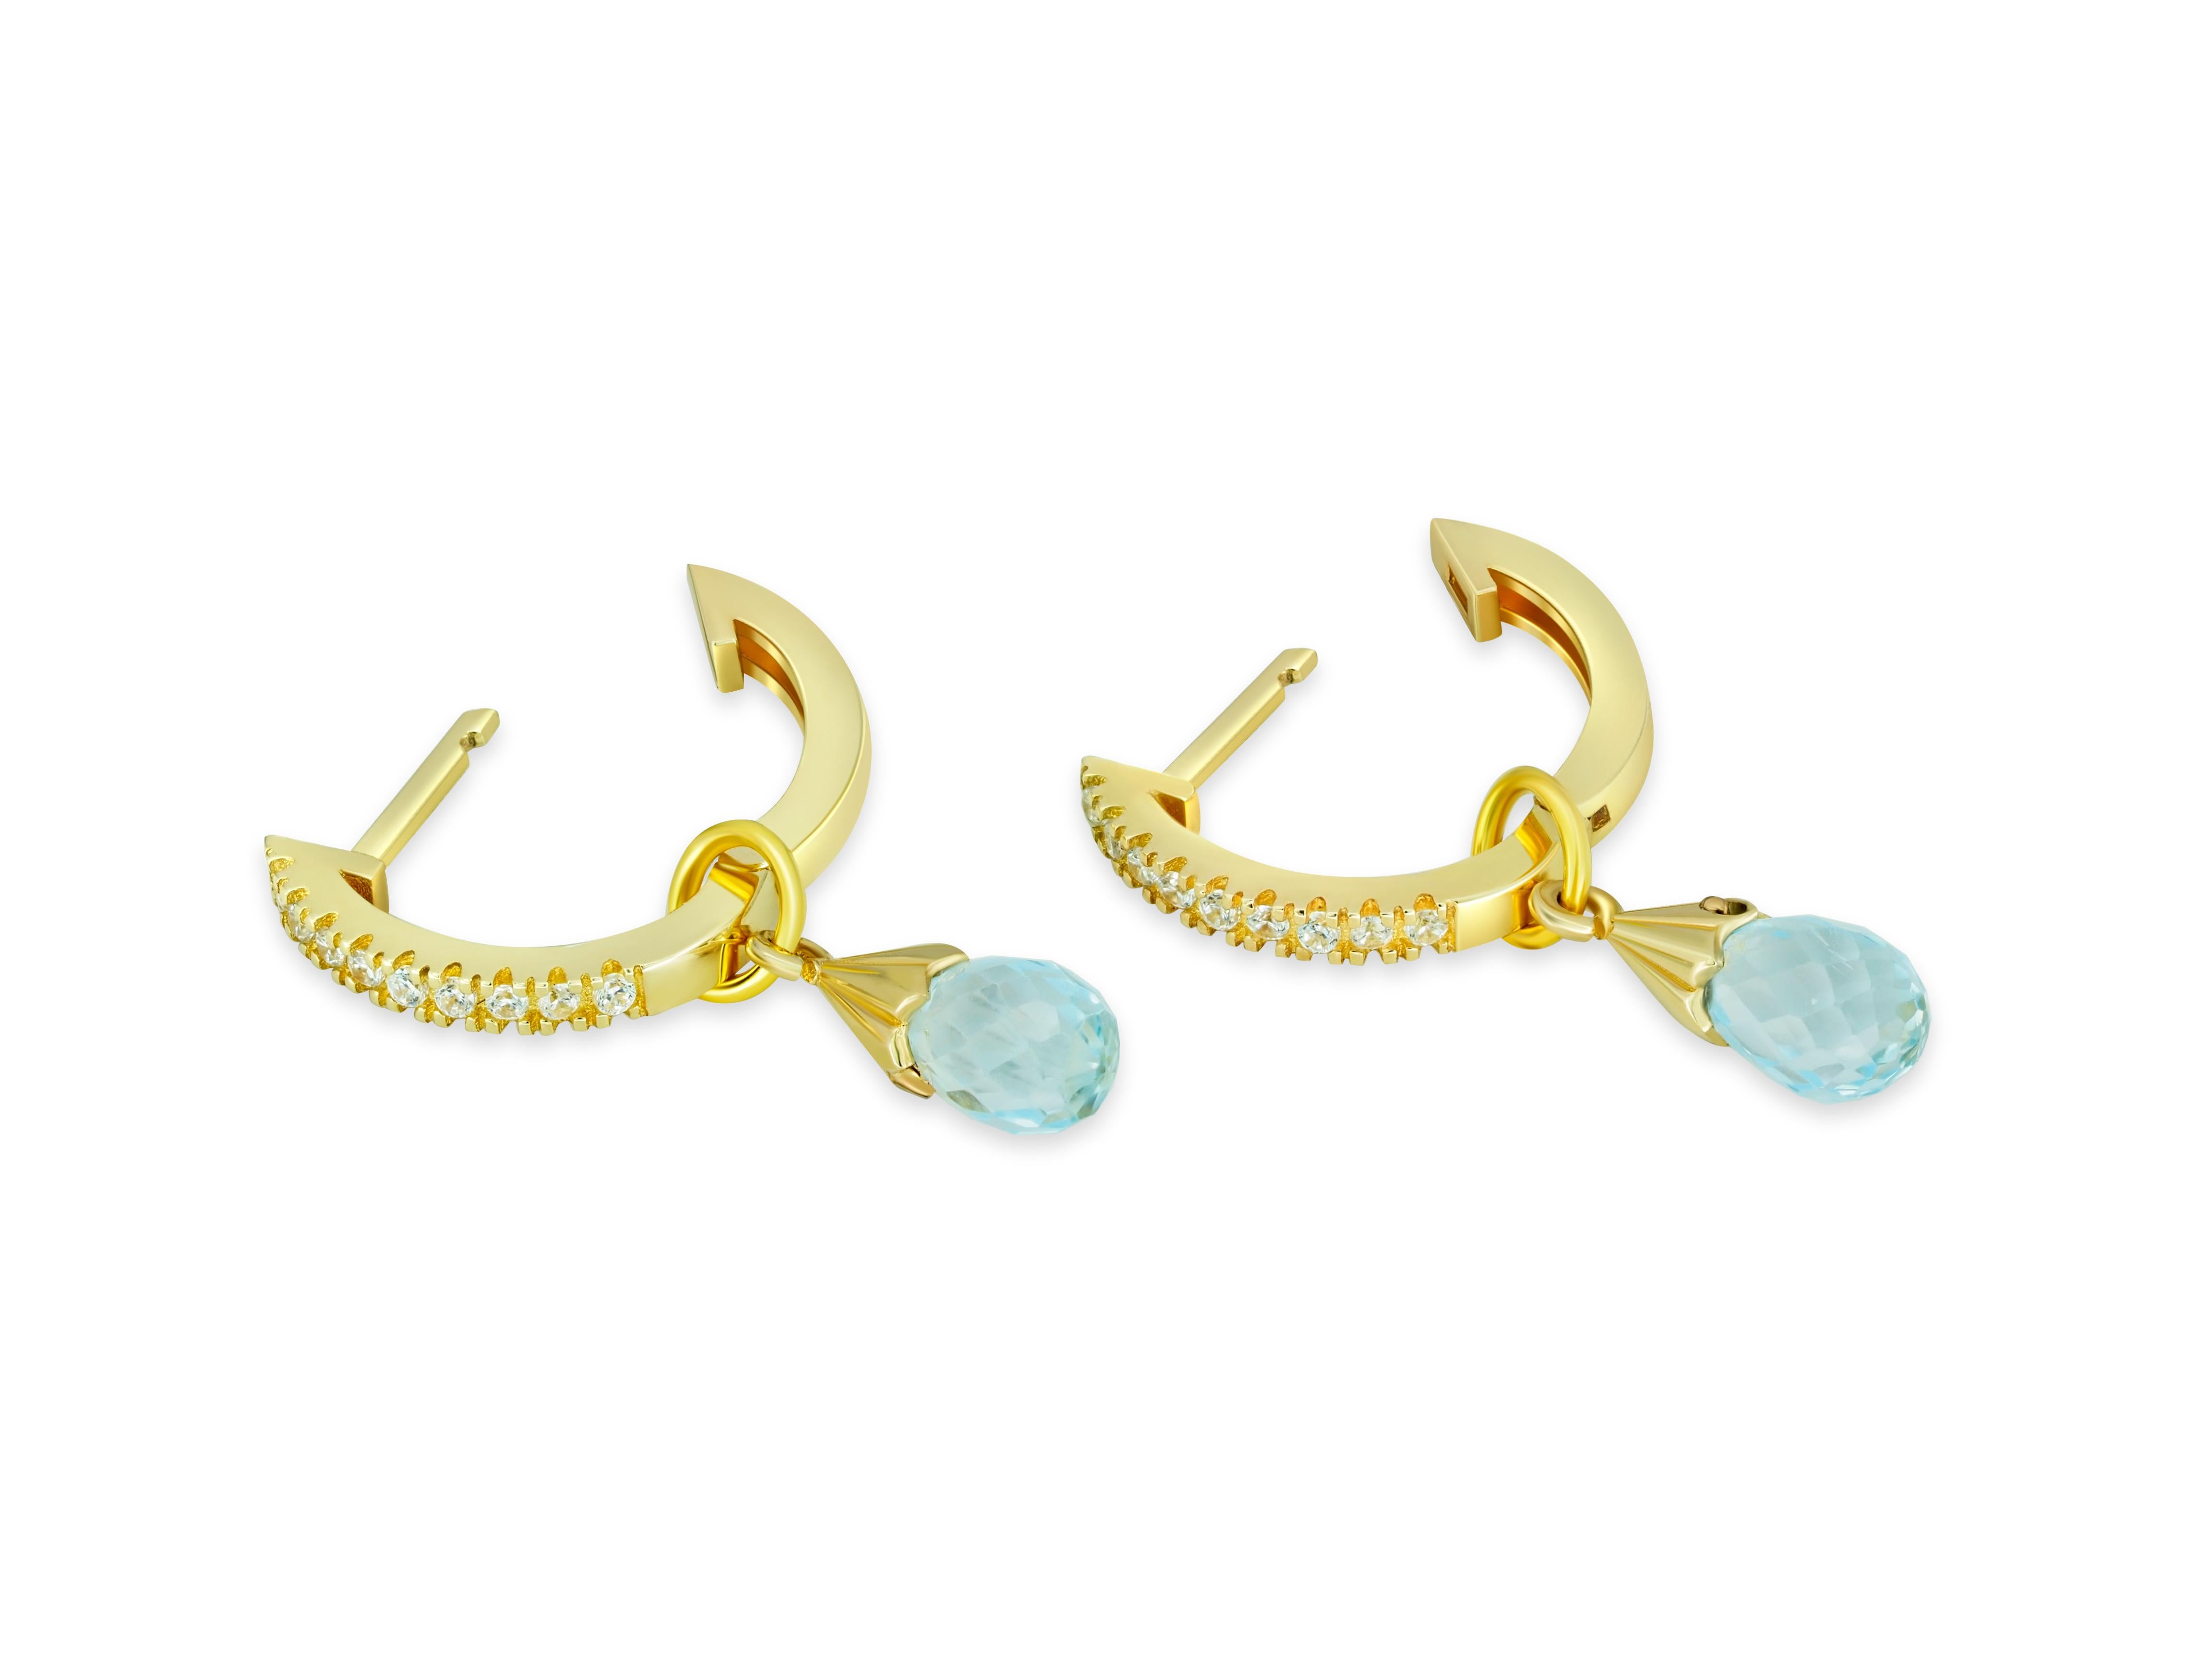 Women's Hoop Earrings and Topaz Briolette Charms in 14k Gold For Sale